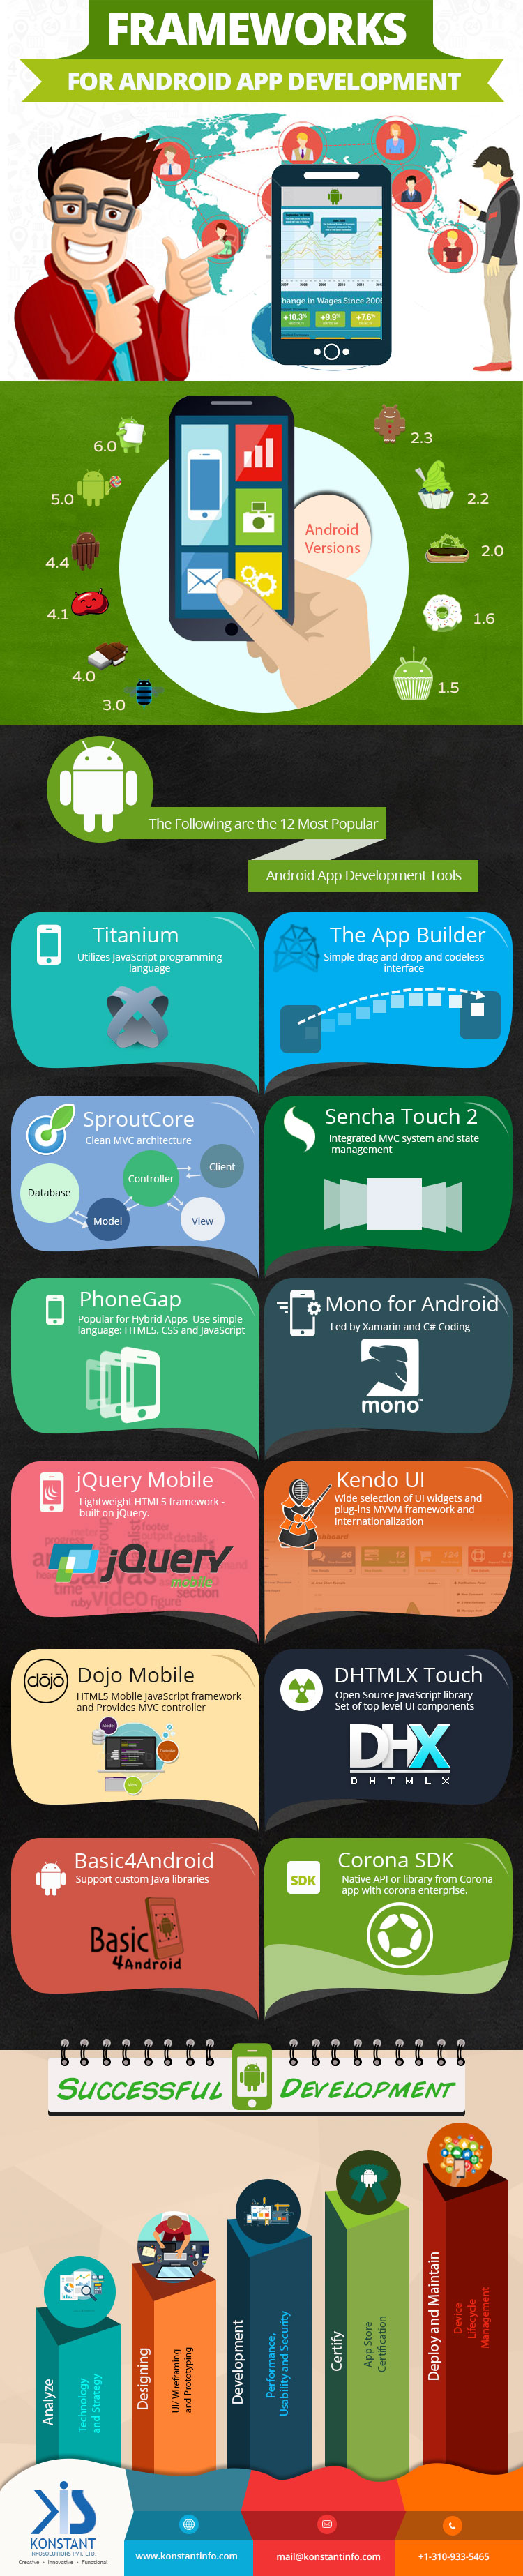 Infographic - Top 12 Frameworks for Android App Development